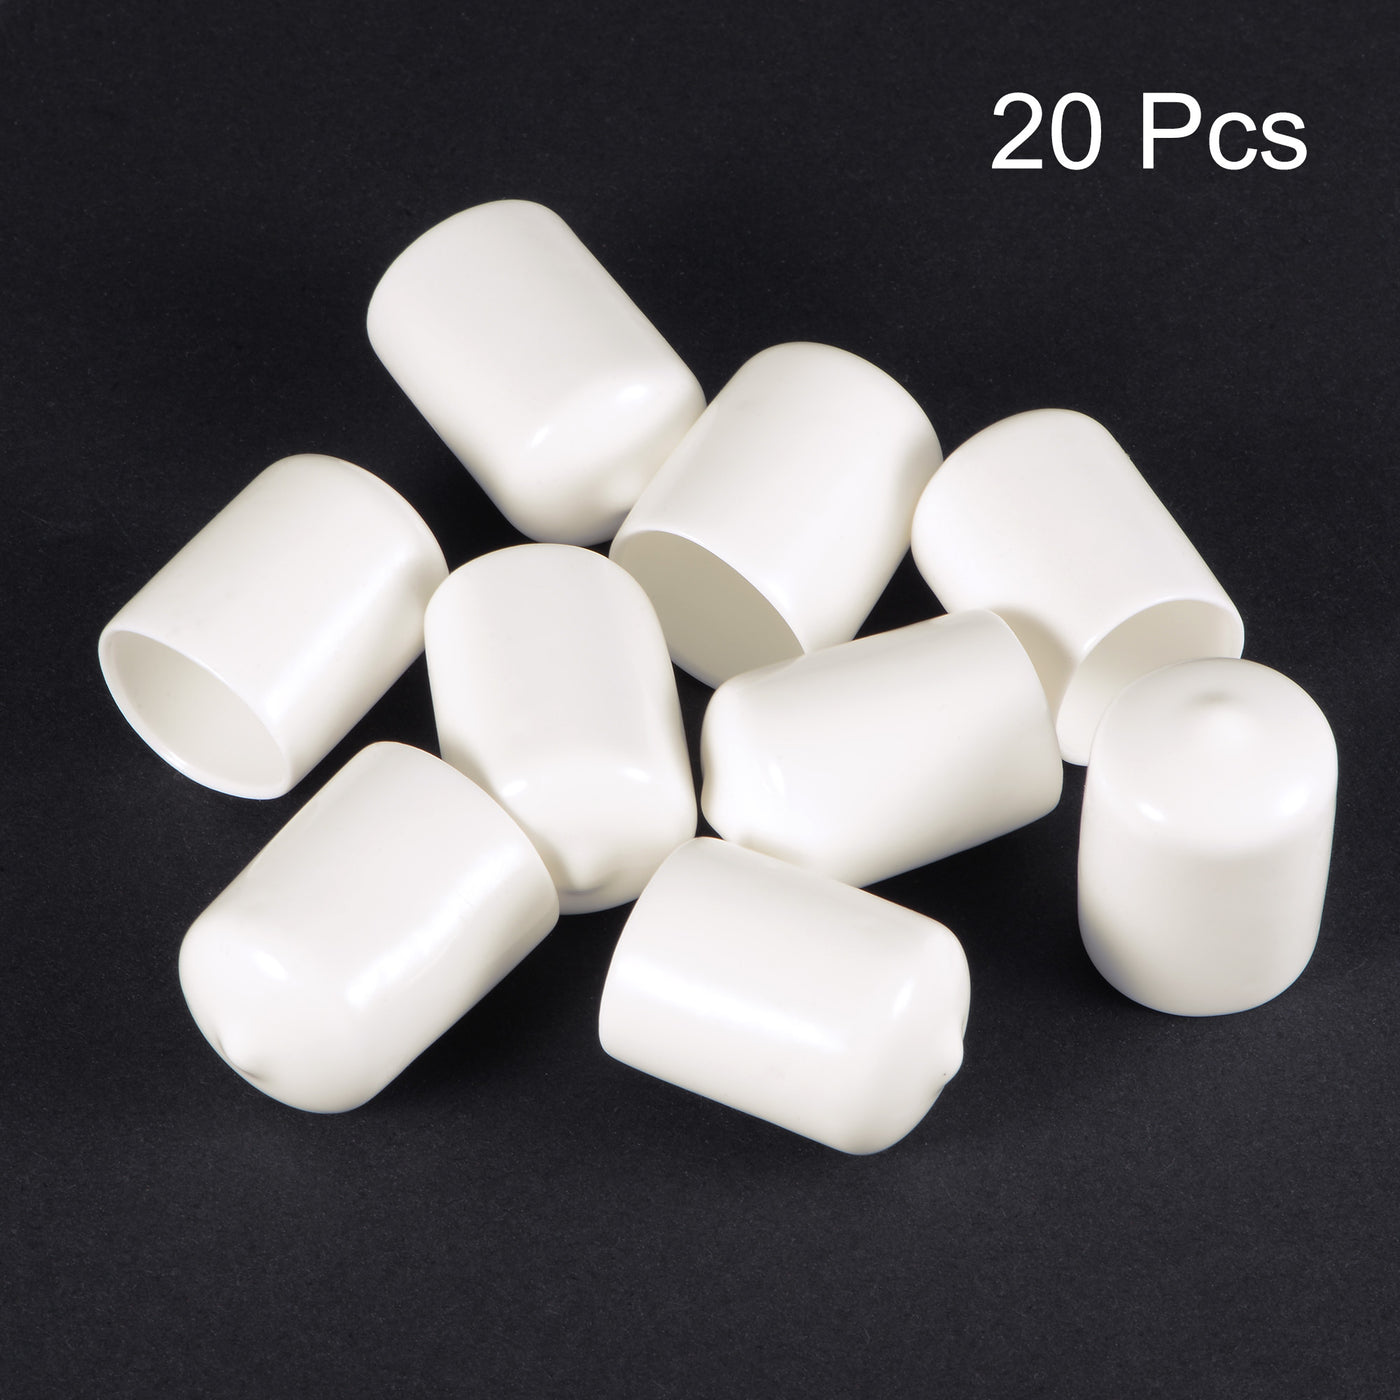 uxcell Uxcell 20pcs Round Rubber End Caps 3/4"(19mm) White Vinyl Cover Screw Thread Protectors